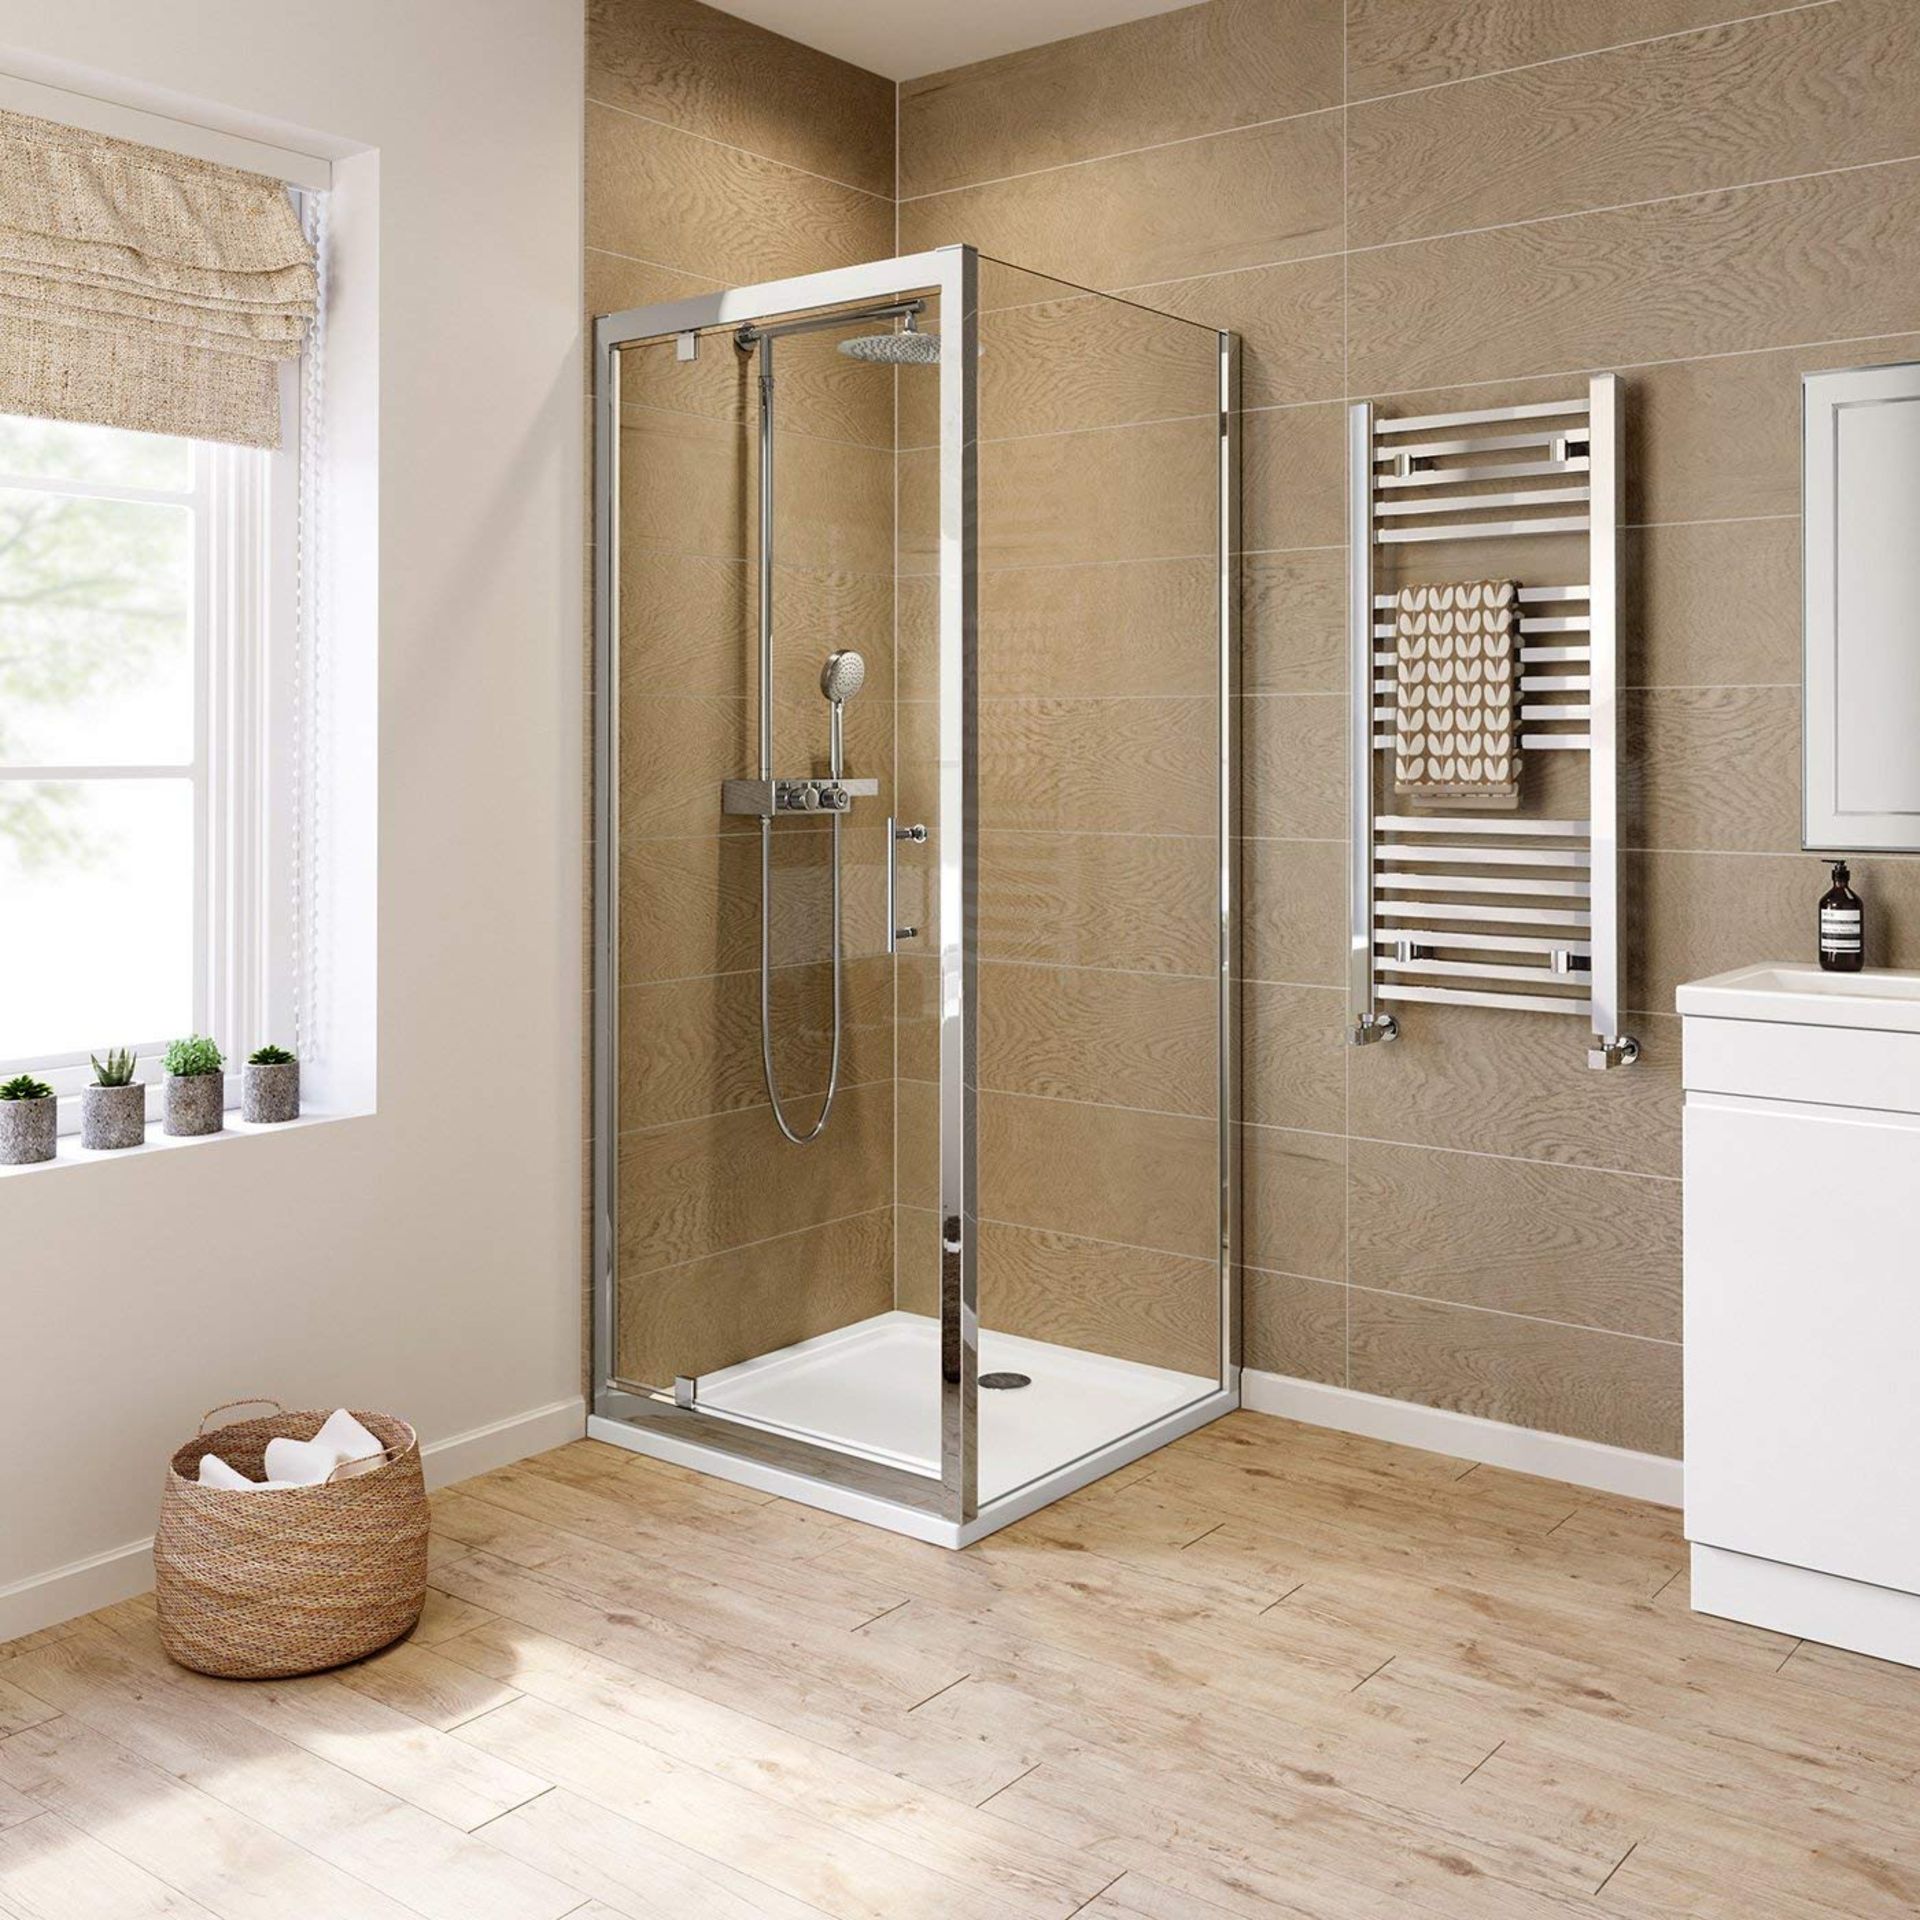 Twyfords 700x700 Pivot Hinged 8mm Glass Shower Enclosure Reversible Door + Side Panel. RRP £34... - Image 2 of 4